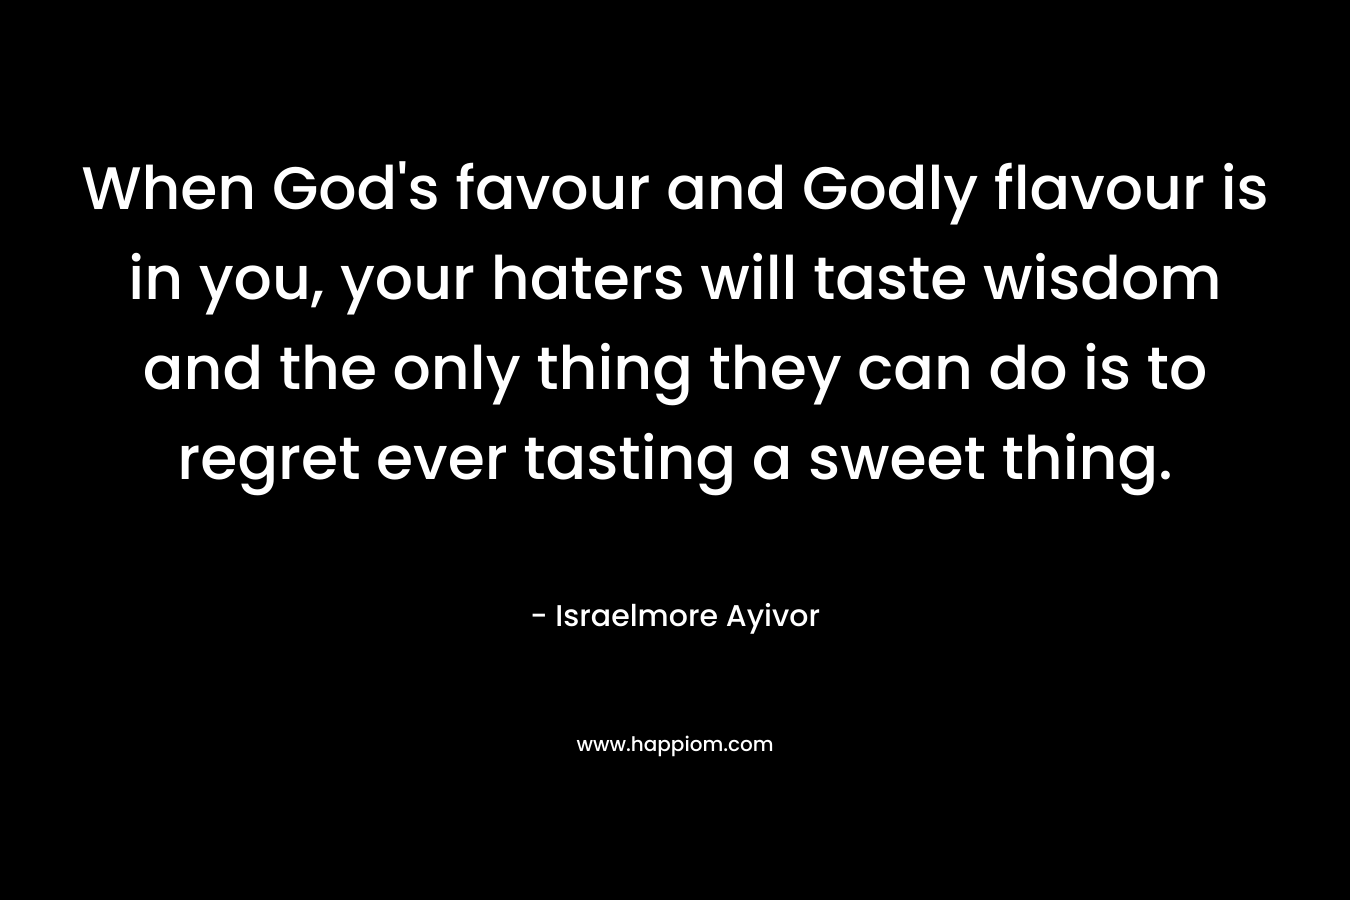 When God's favour and Godly flavour is in you, your haters will taste wisdom and the only thing they can do is to regret ever tasting a sweet thing.